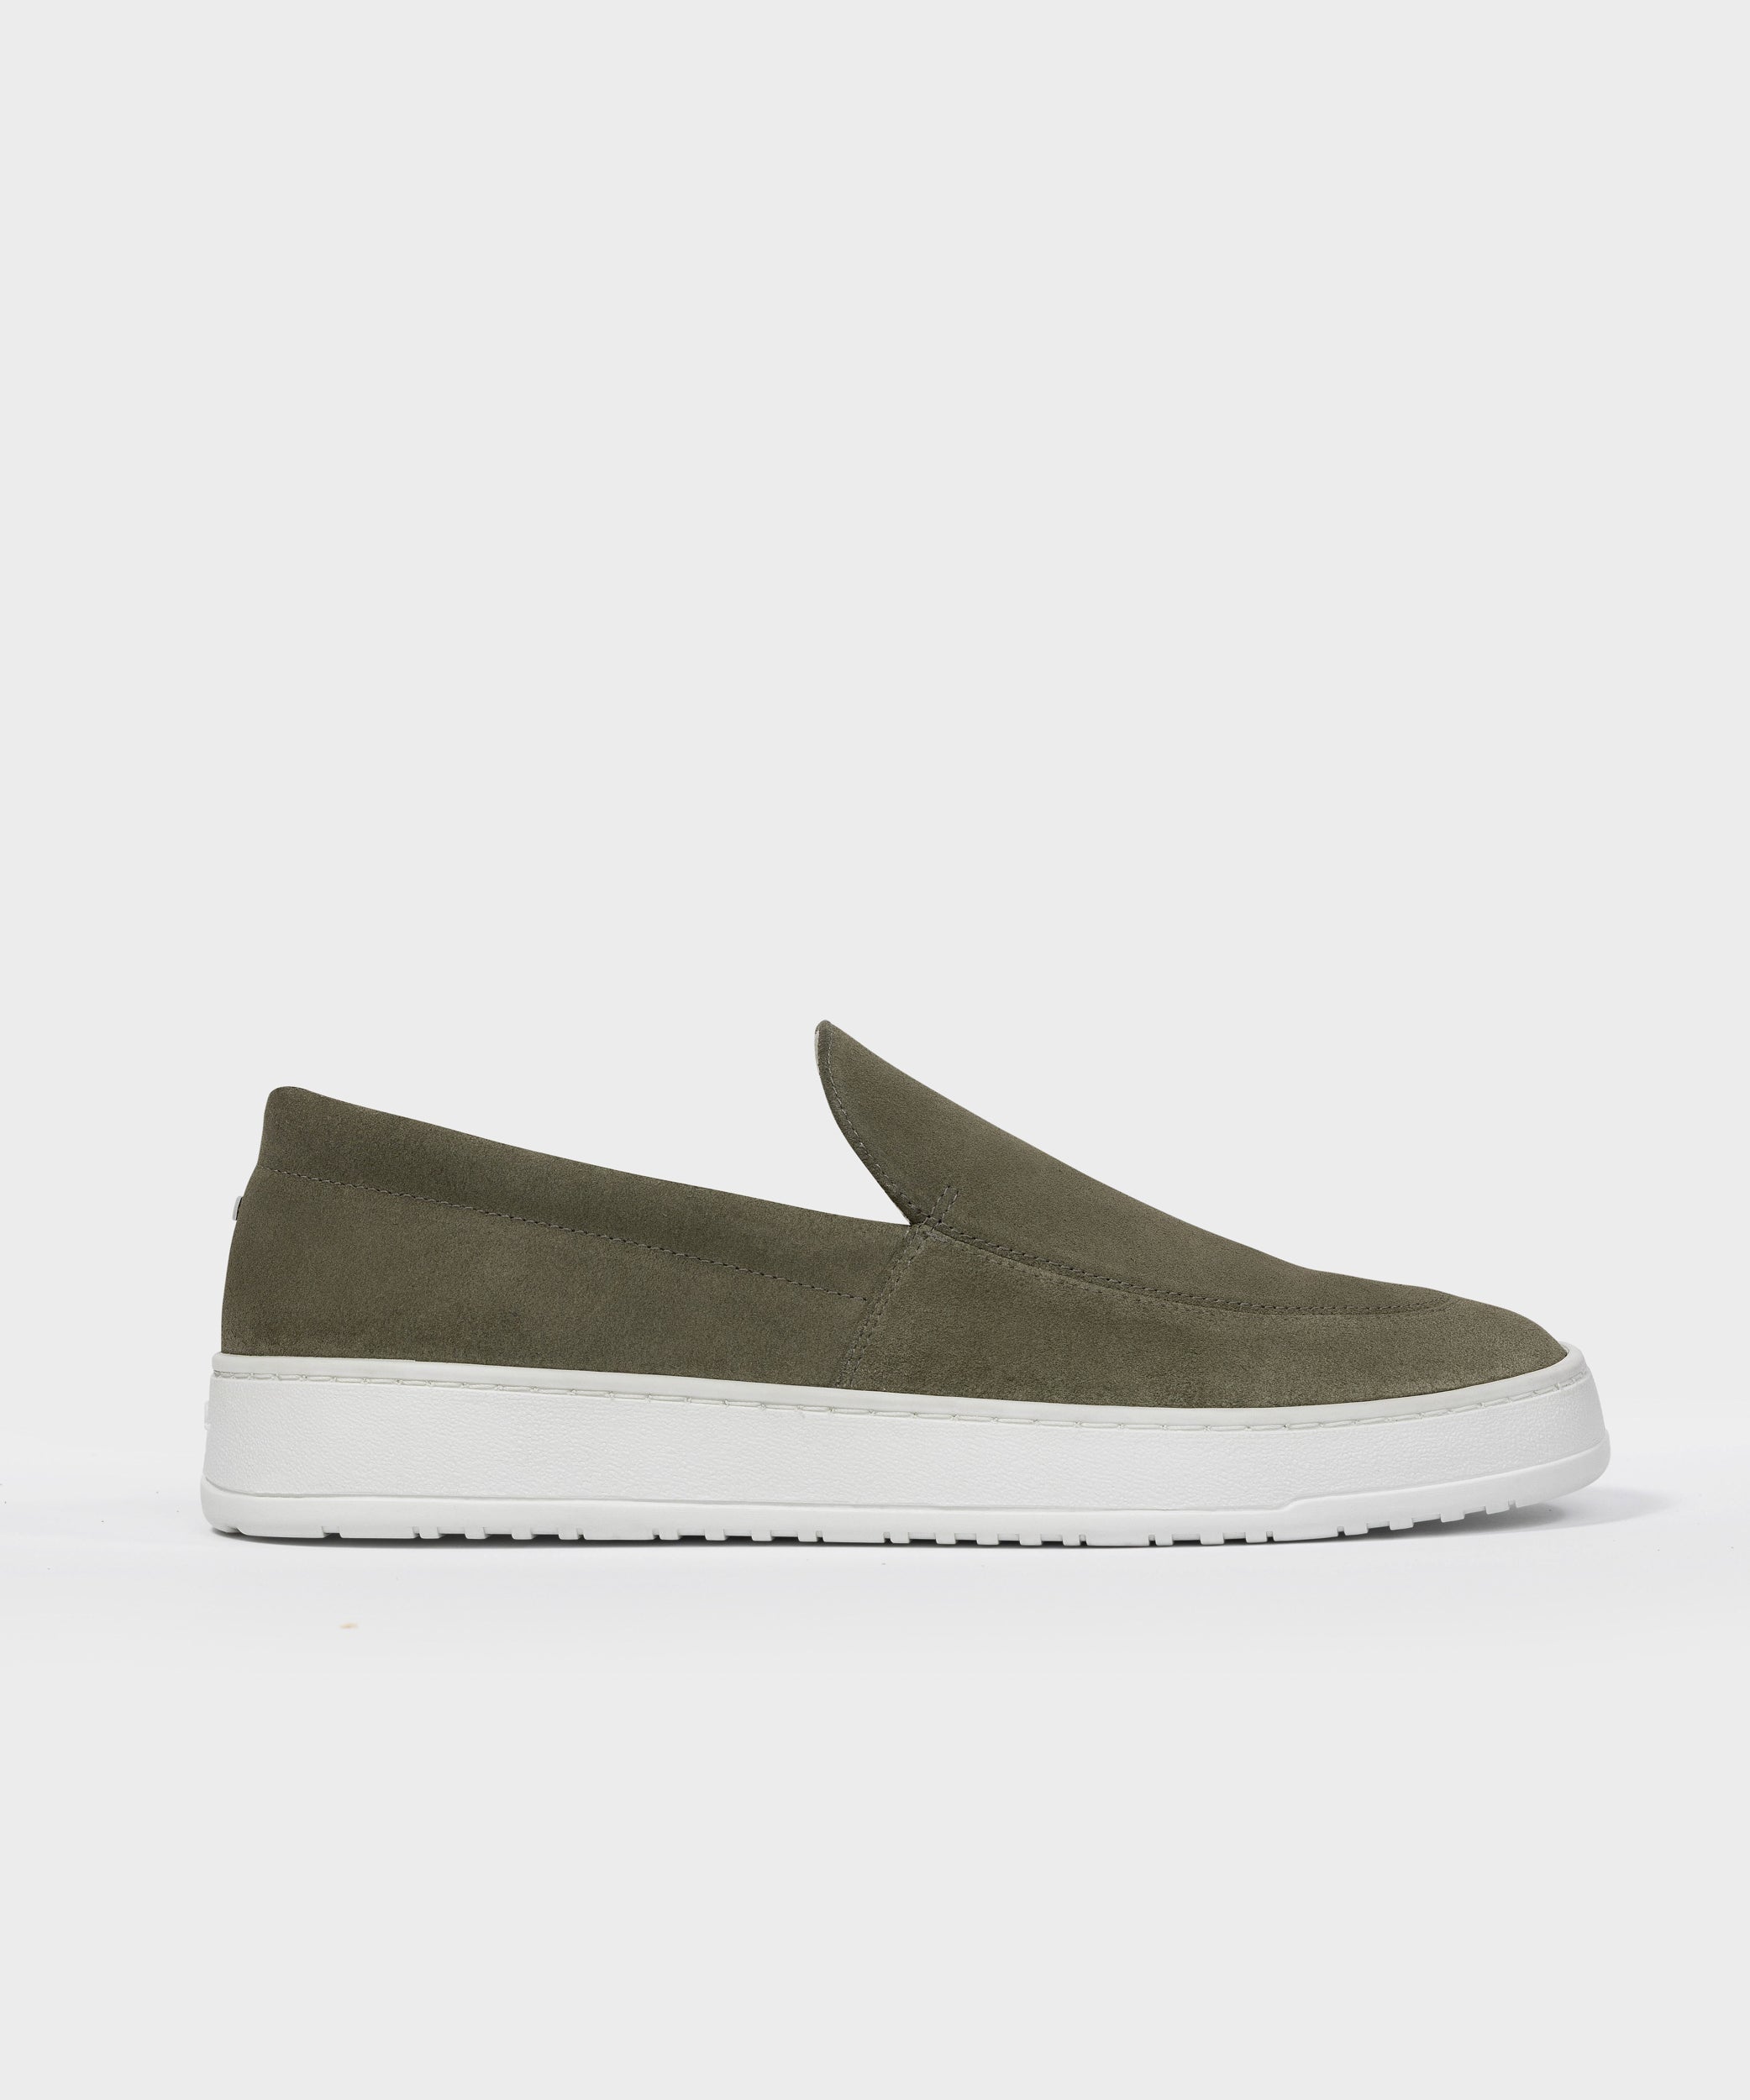 Loafers Men Suede Green - LS 01 Vetiver Green